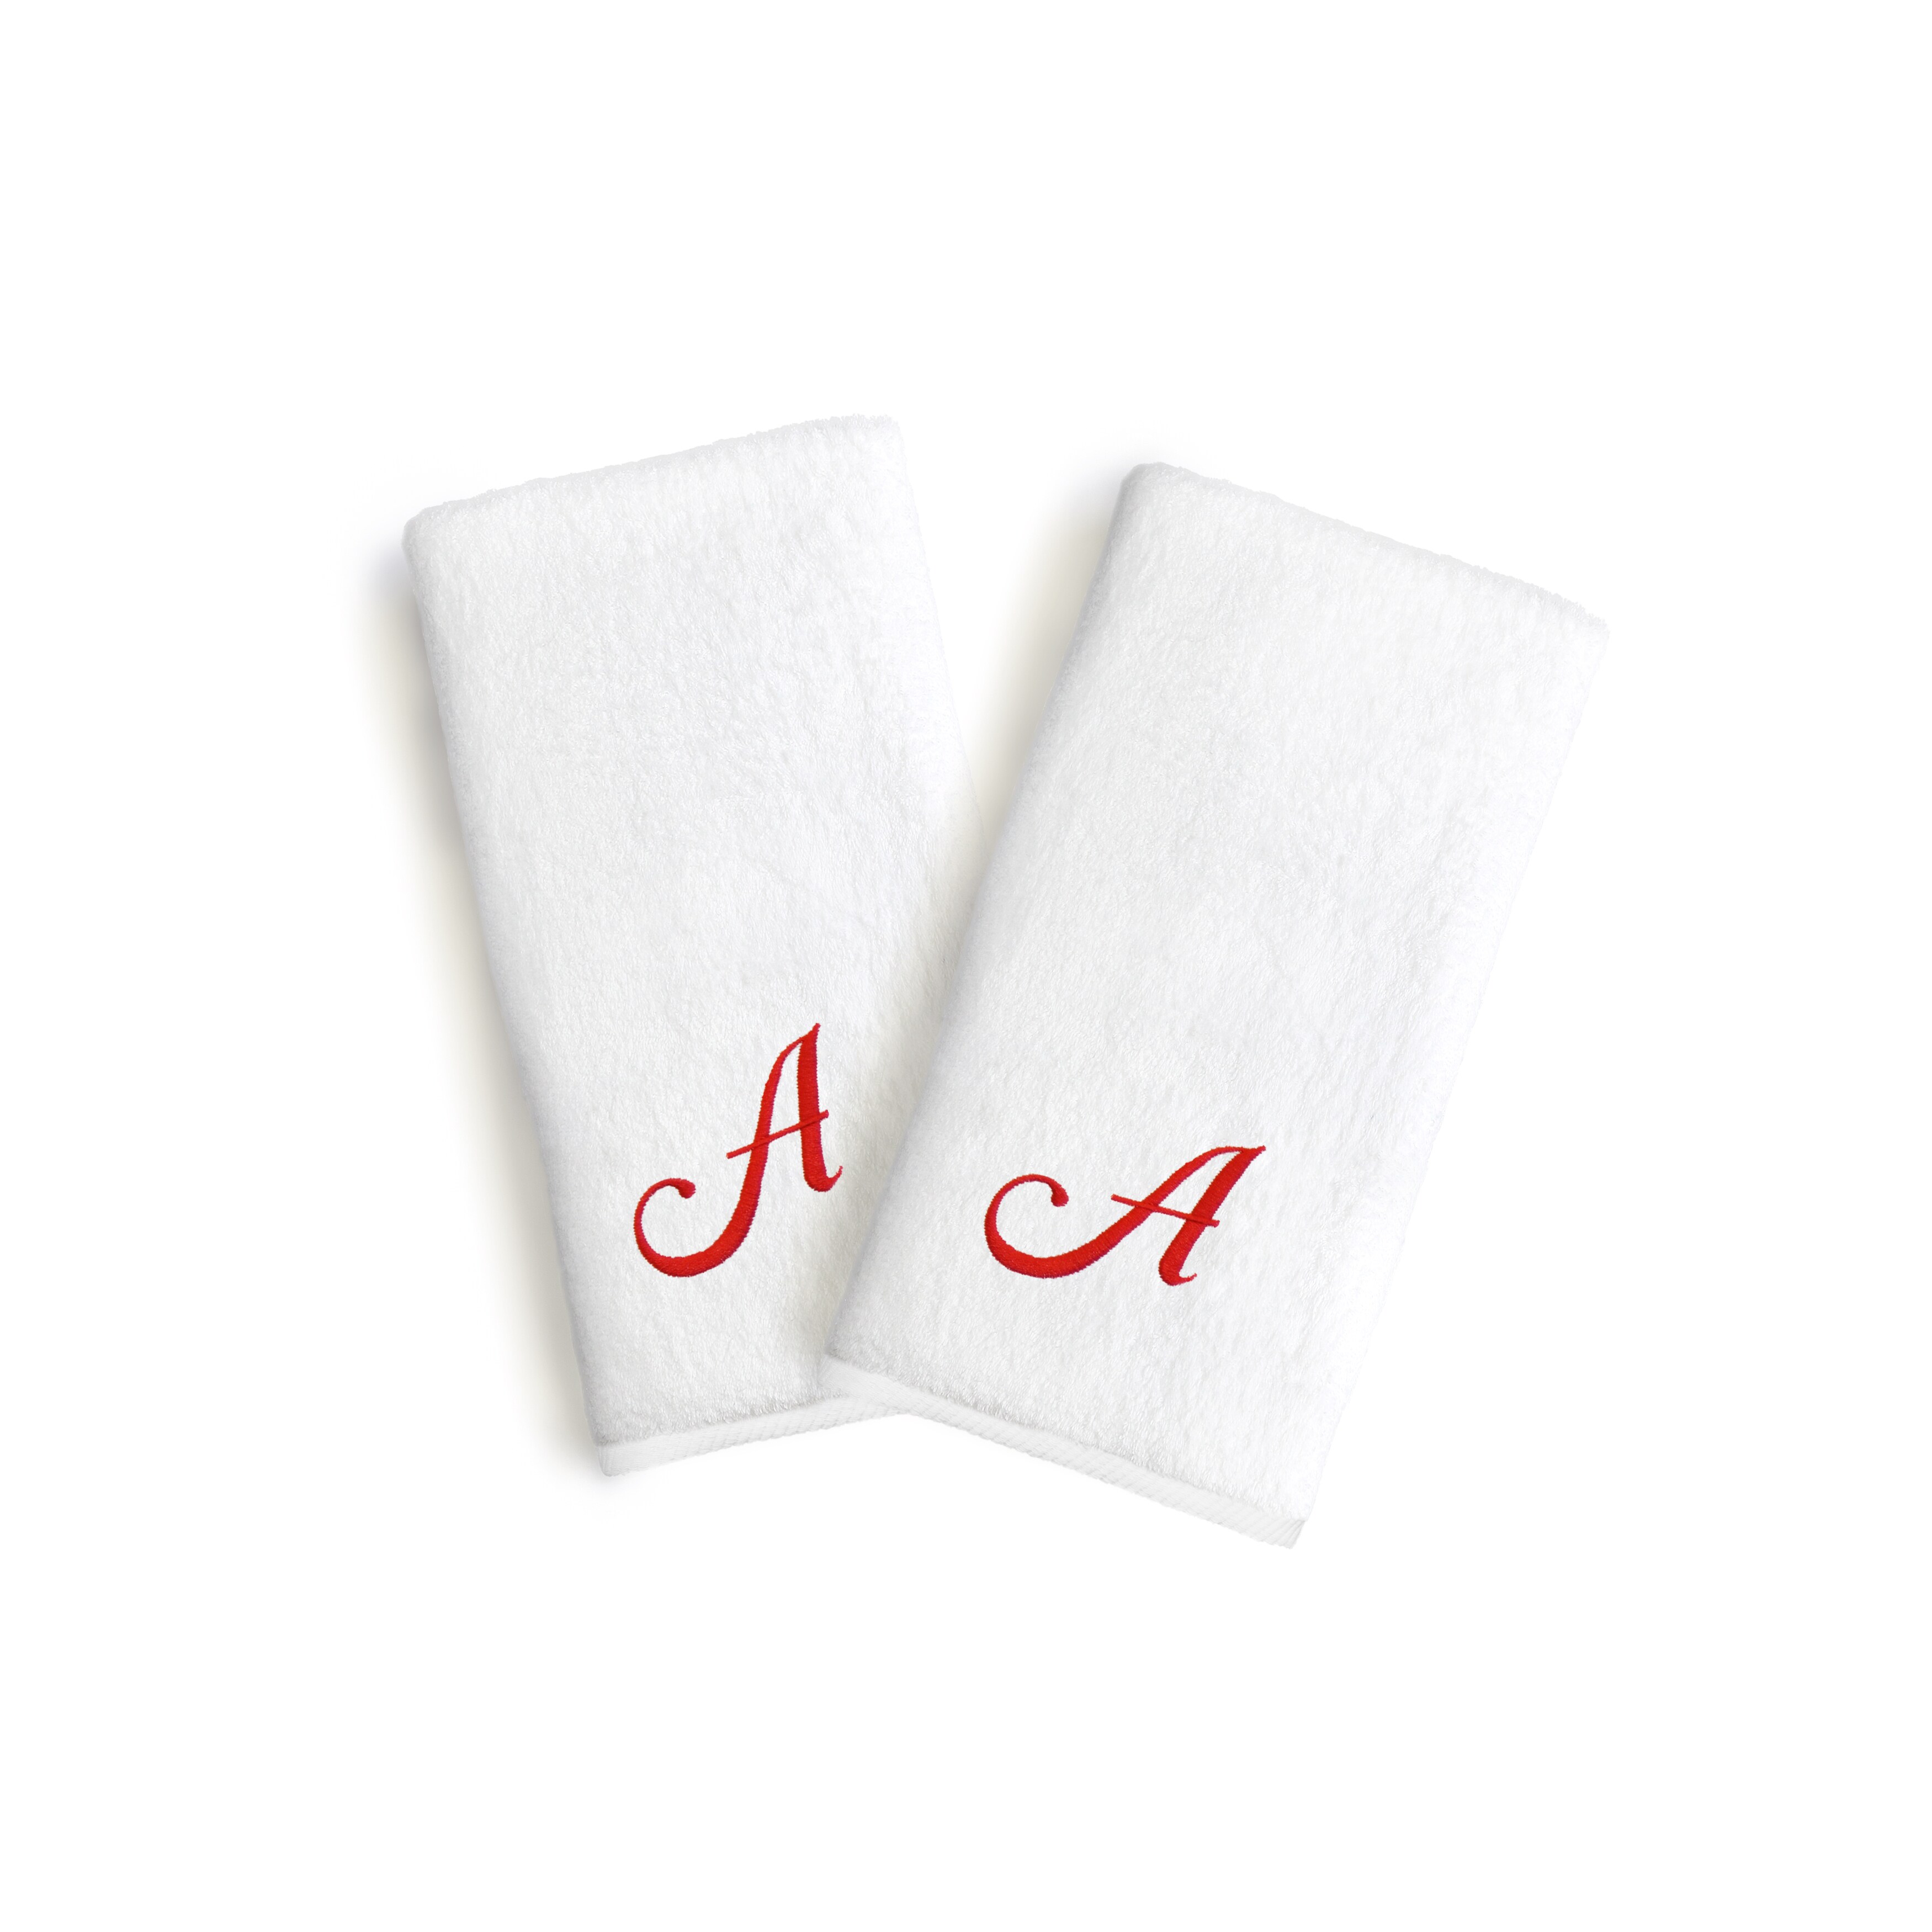 https://ak1.ostkcdn.com/images/products/12308284/Authentic-Hotel-and-Spa-2-piece-White-Turkish-Cotton-Hand-Towels-with-Holiday-Red-Script-Monogrammed-Initial-c39133a7-8f38-4d43-9b86-1e87048563fd.jpg